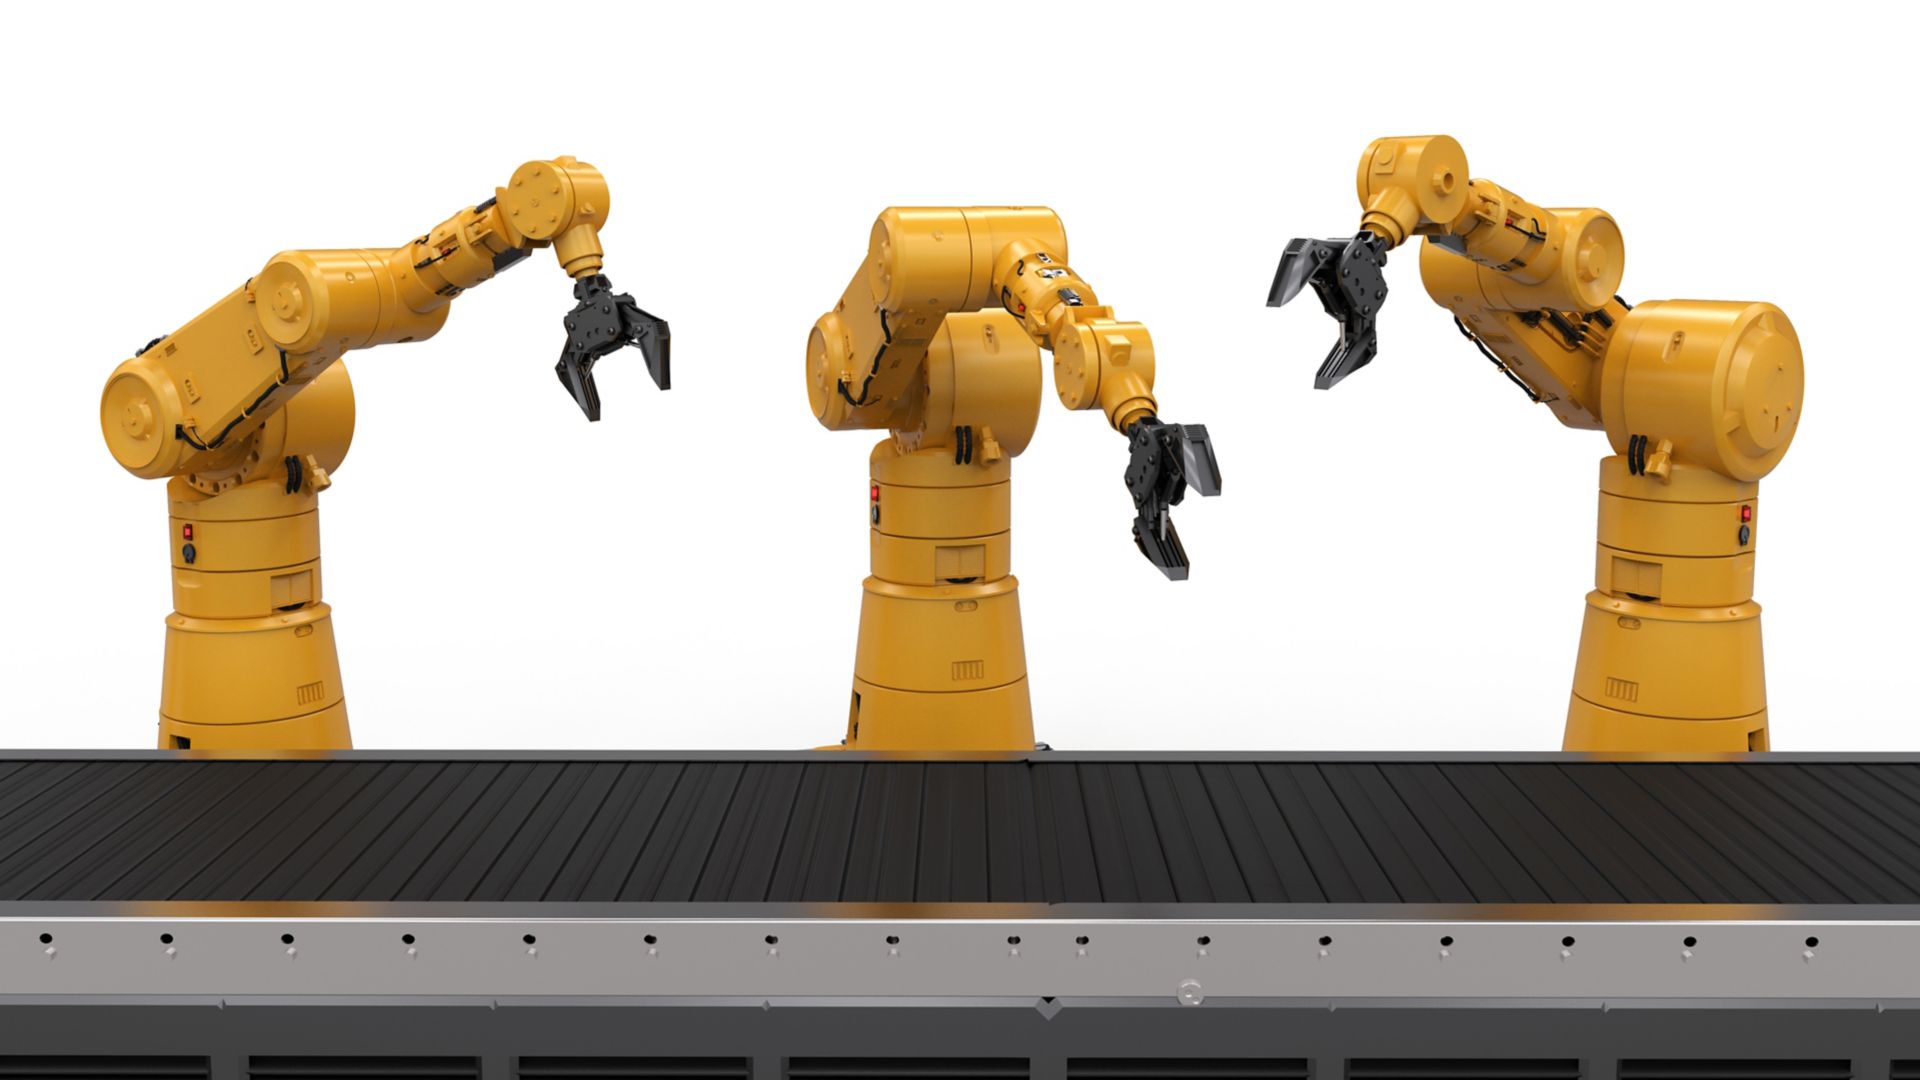 Industrial robotic arms with conveyor belt assembly line